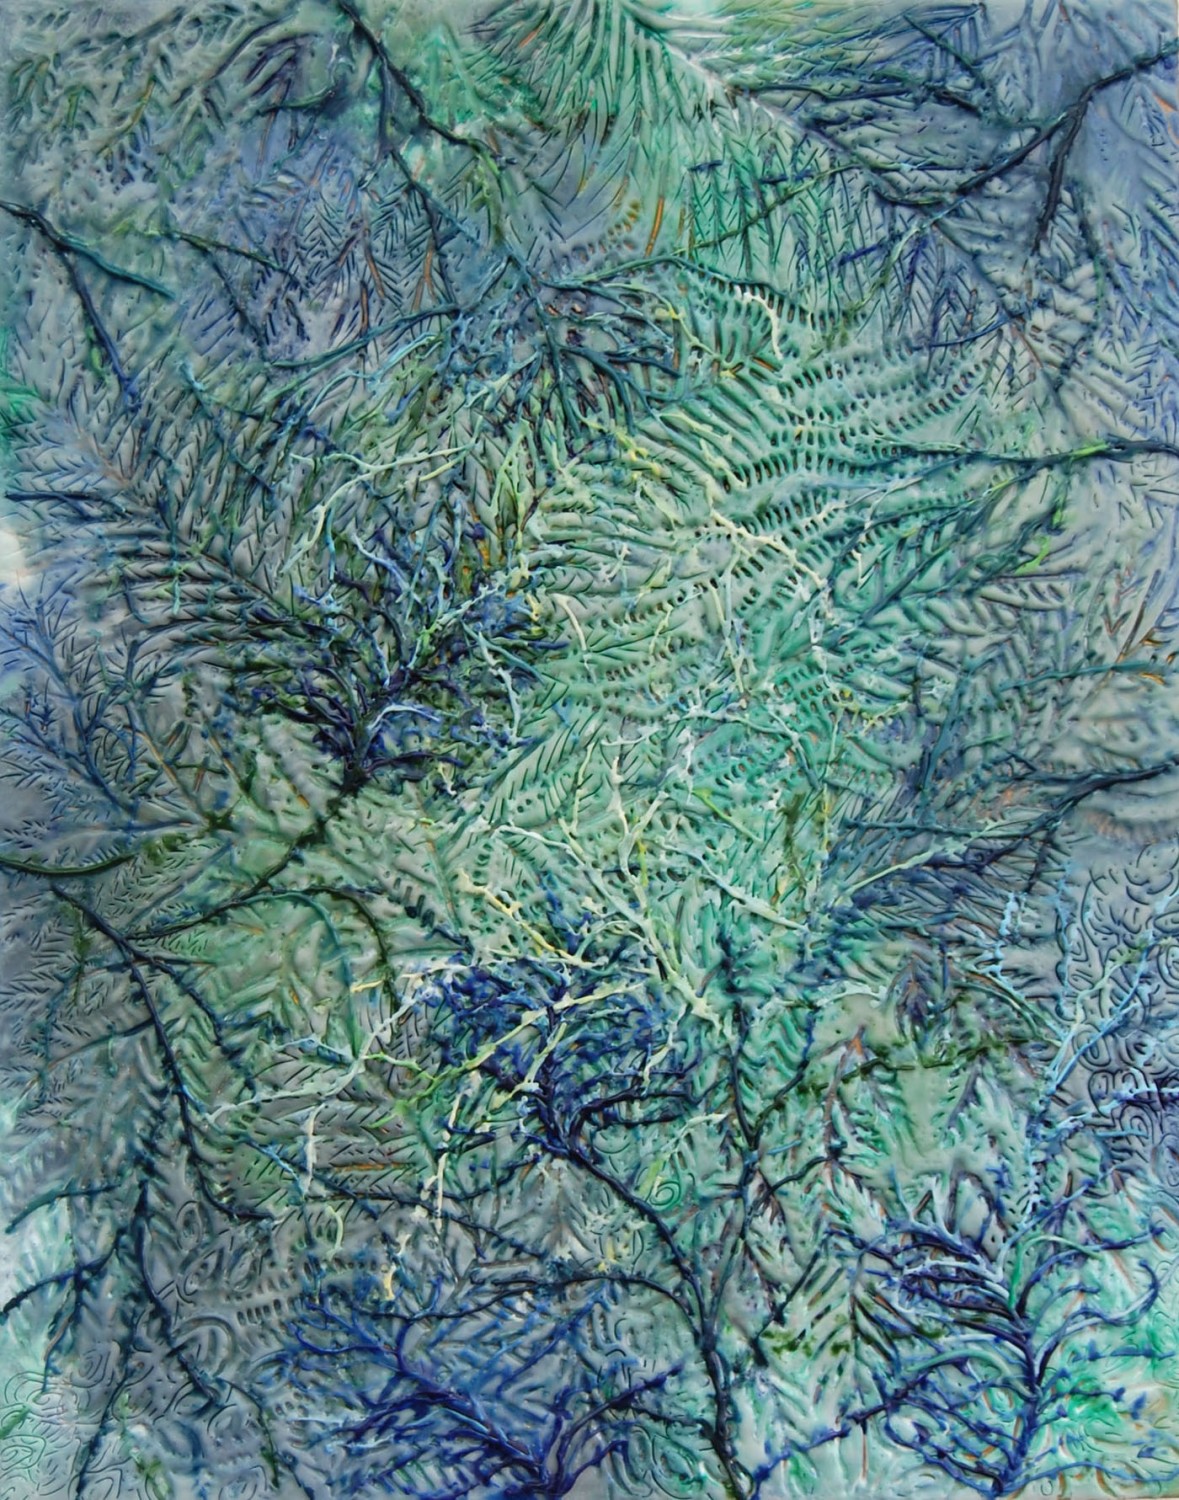 Fern Viscera, 2010, encaustic on panel, 28 x 22 inches, in the collection of the artist